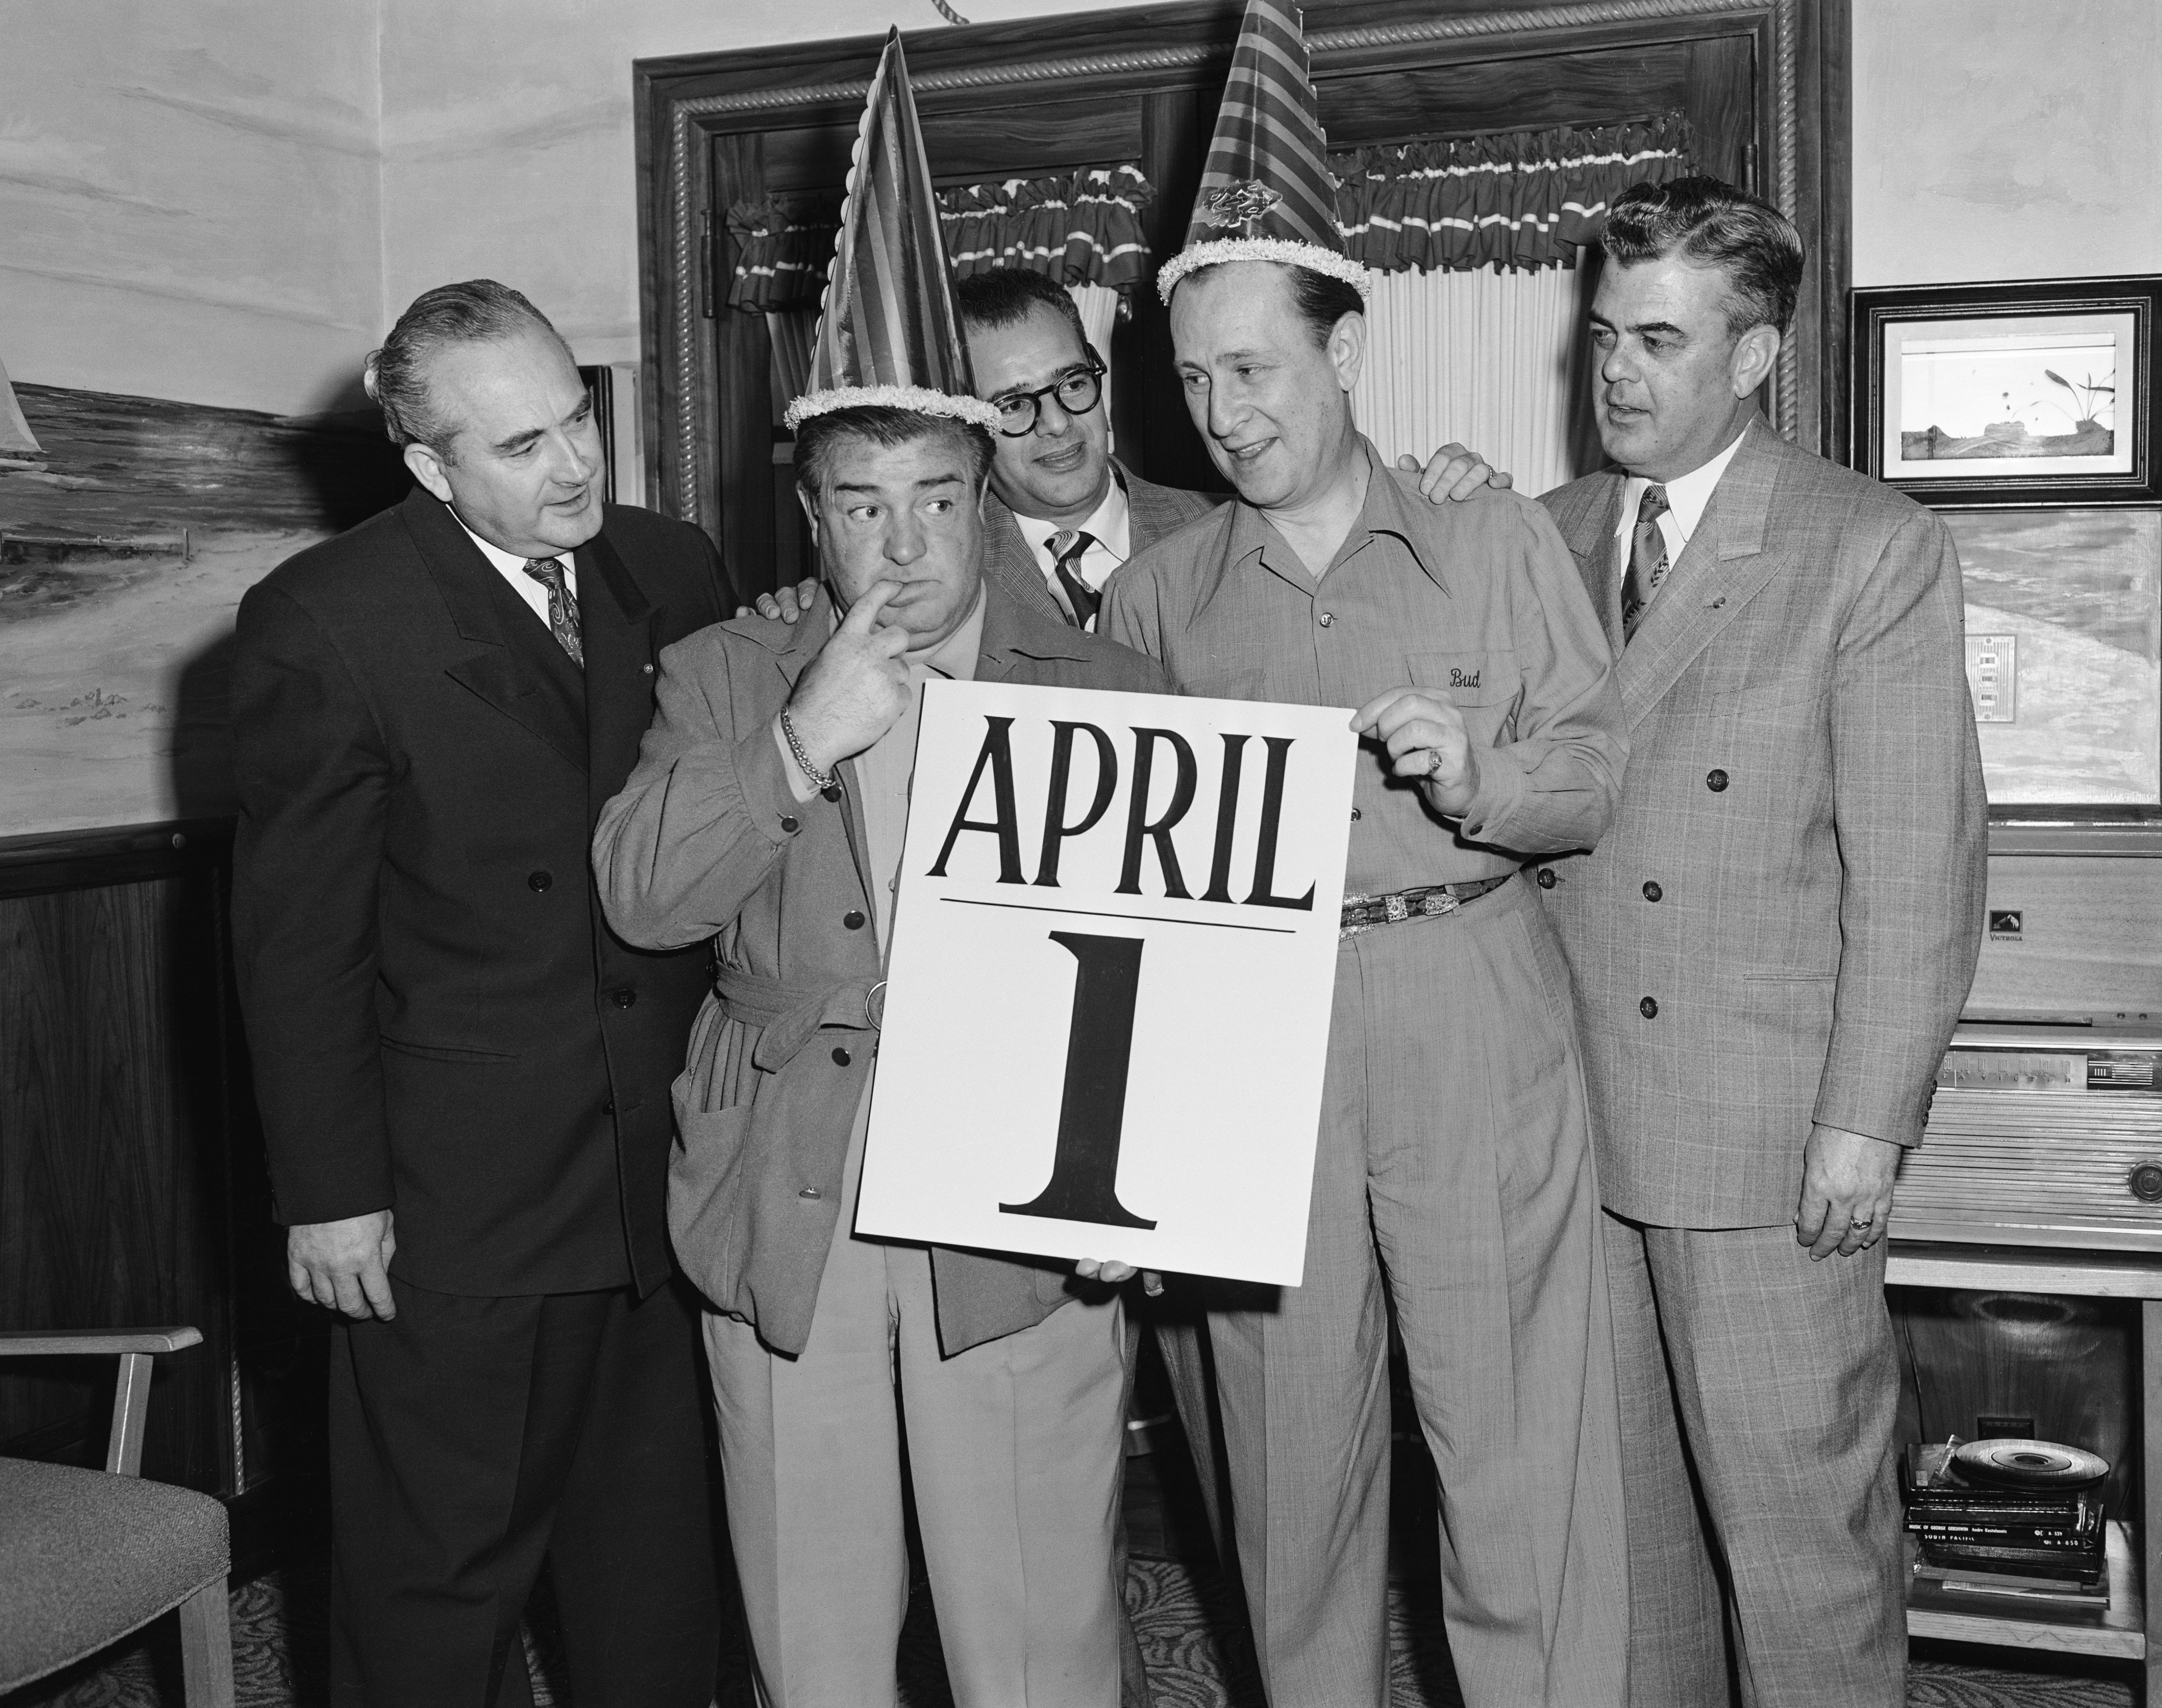 Bud Abbott and Lou Costello on April Fool's Day, early 1950s (Gene Lester—Getty Images)